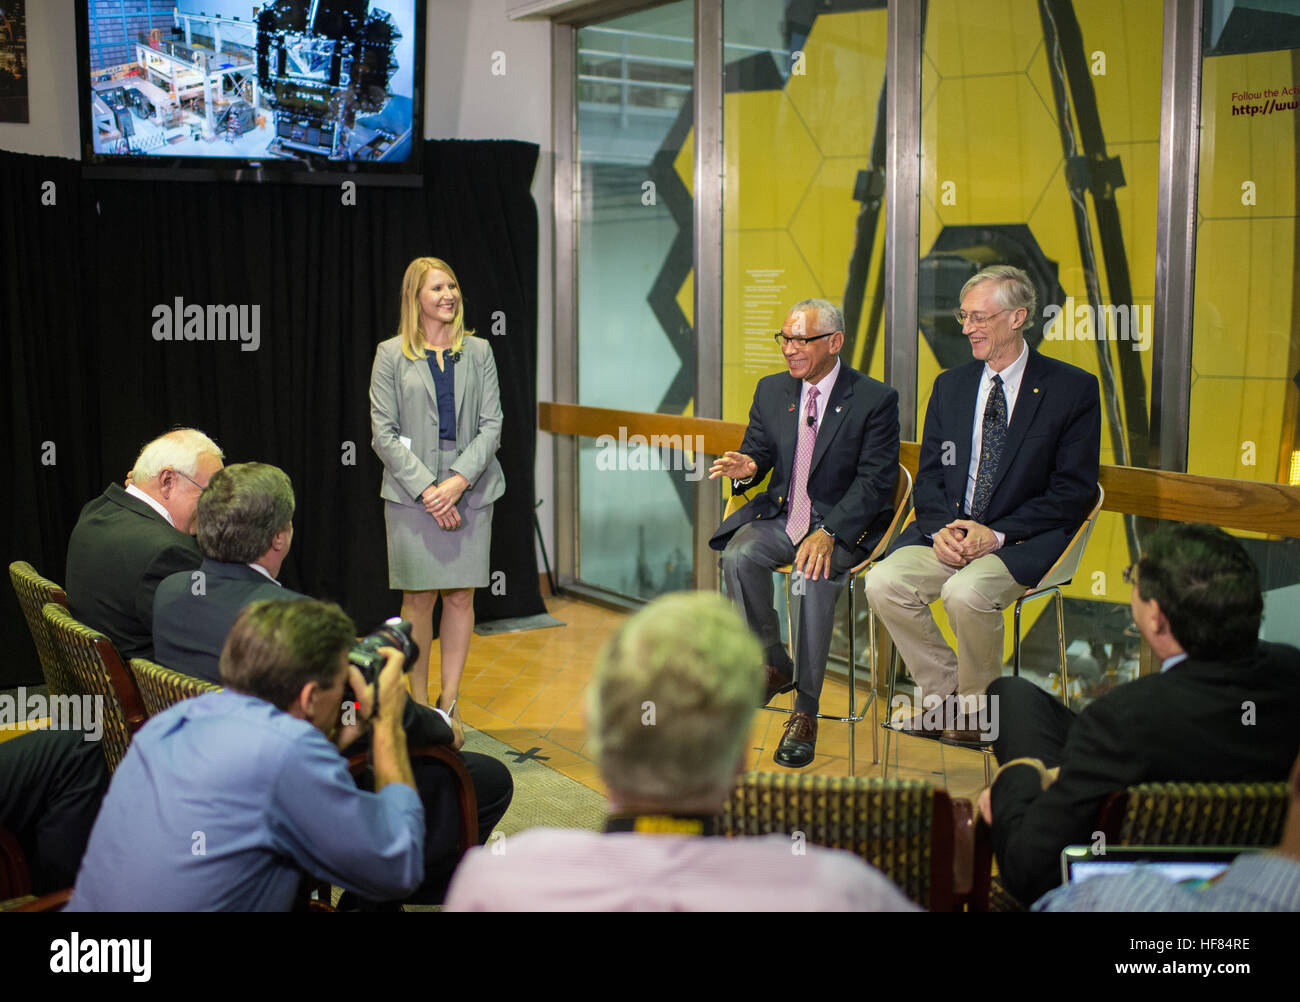 NASA Public Affairs Officer Stephanie Schierholz, left, moderates a question and answer session with NASA Administrator Charles Bolden, second from left, and James Webb Space Telescope Senior Project Scientist John Mather, right, during a media event on Wednesday, Nov. 2, 2016 at NASA's Goddard Spaceflight Center in Greenbelt, Md. The James Webb Space Telescope, the world's largest and most complex space telescope, will study every phase in the history of the universe; from the first luminous glows of the Big Bang, to the formation of planetary systems capable of supporting life, to the evolut Stock Photo